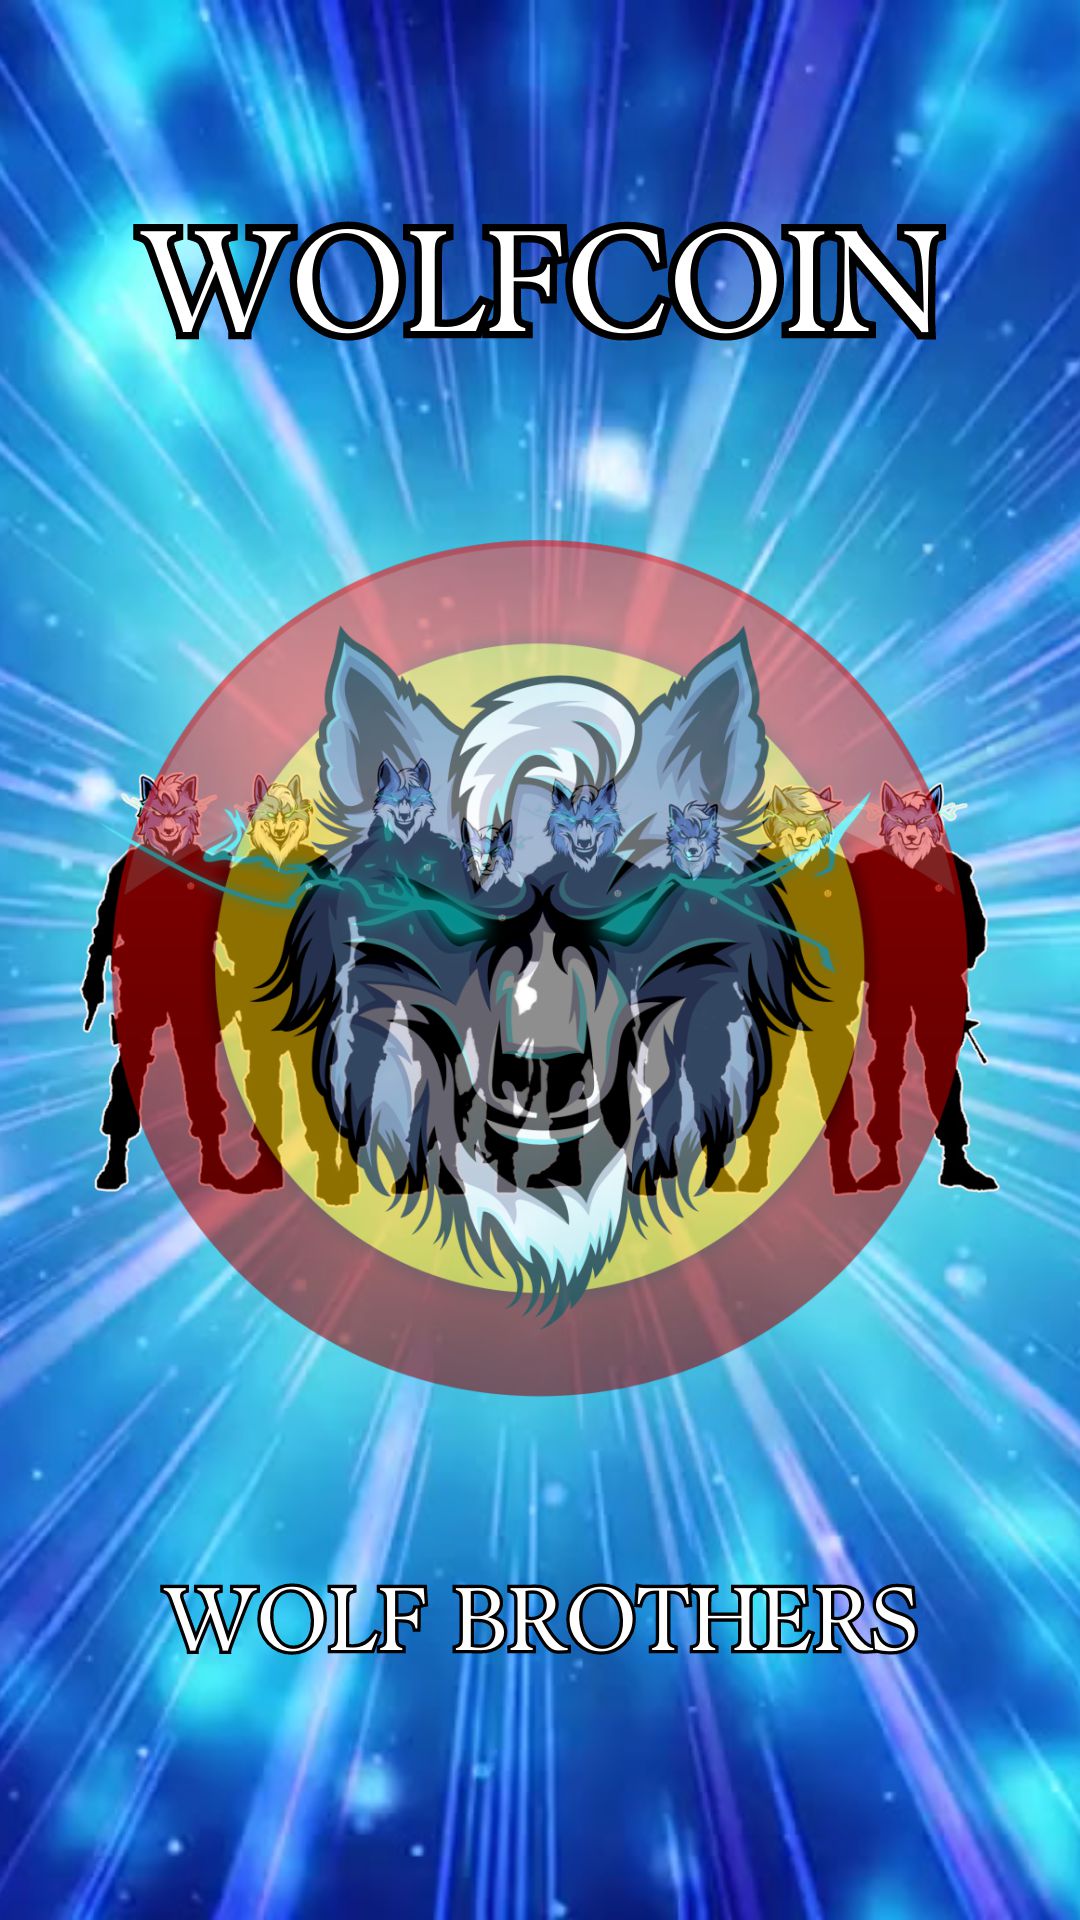 WE ARE WOLF BROTHERS(WOLFCOIN) (2).png.jpg